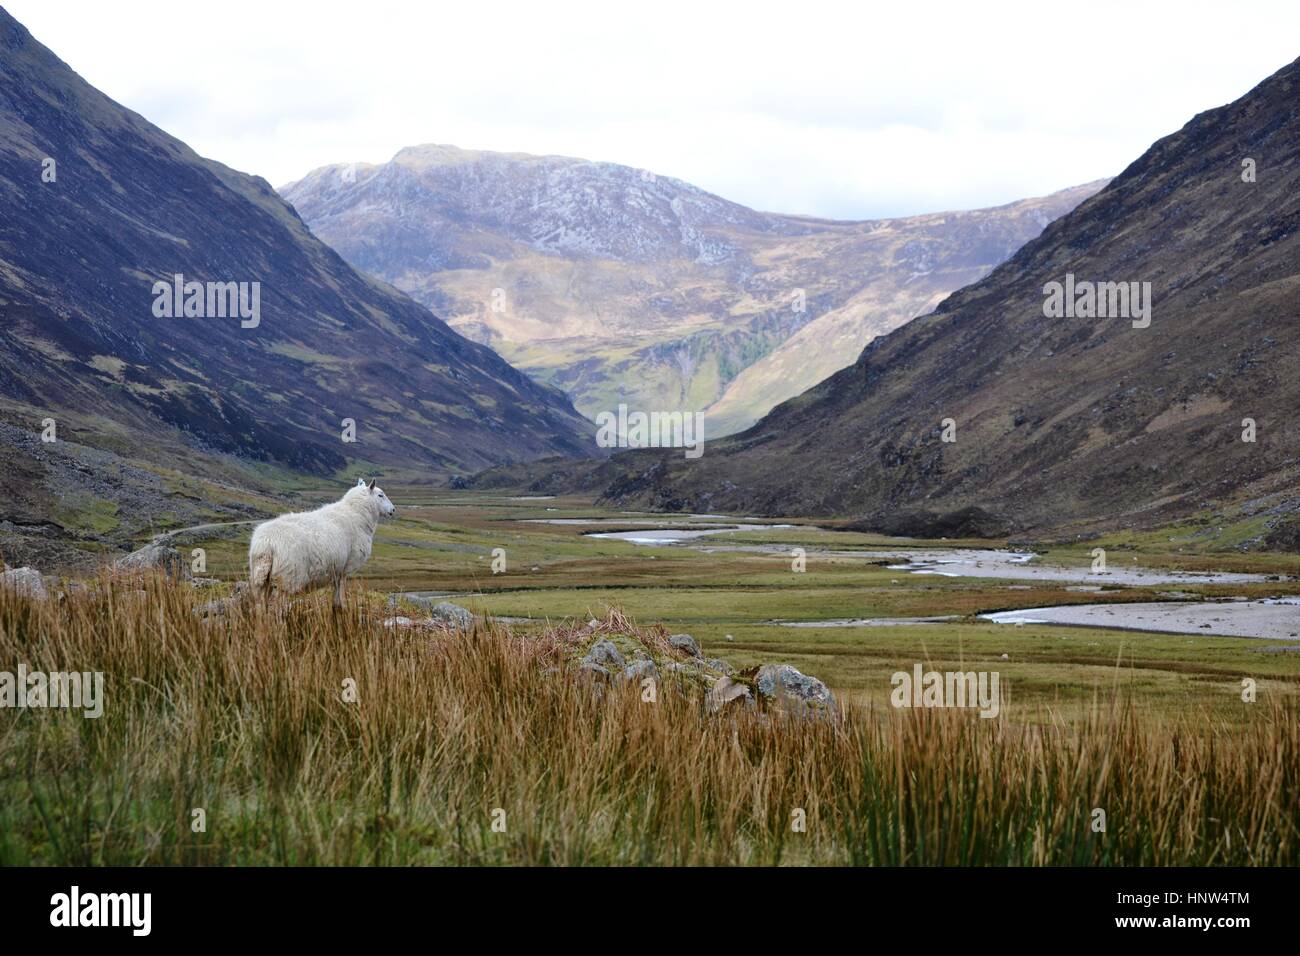 Lone sheep looking out at Scottish glen with mountains and river beyond Stock Photo